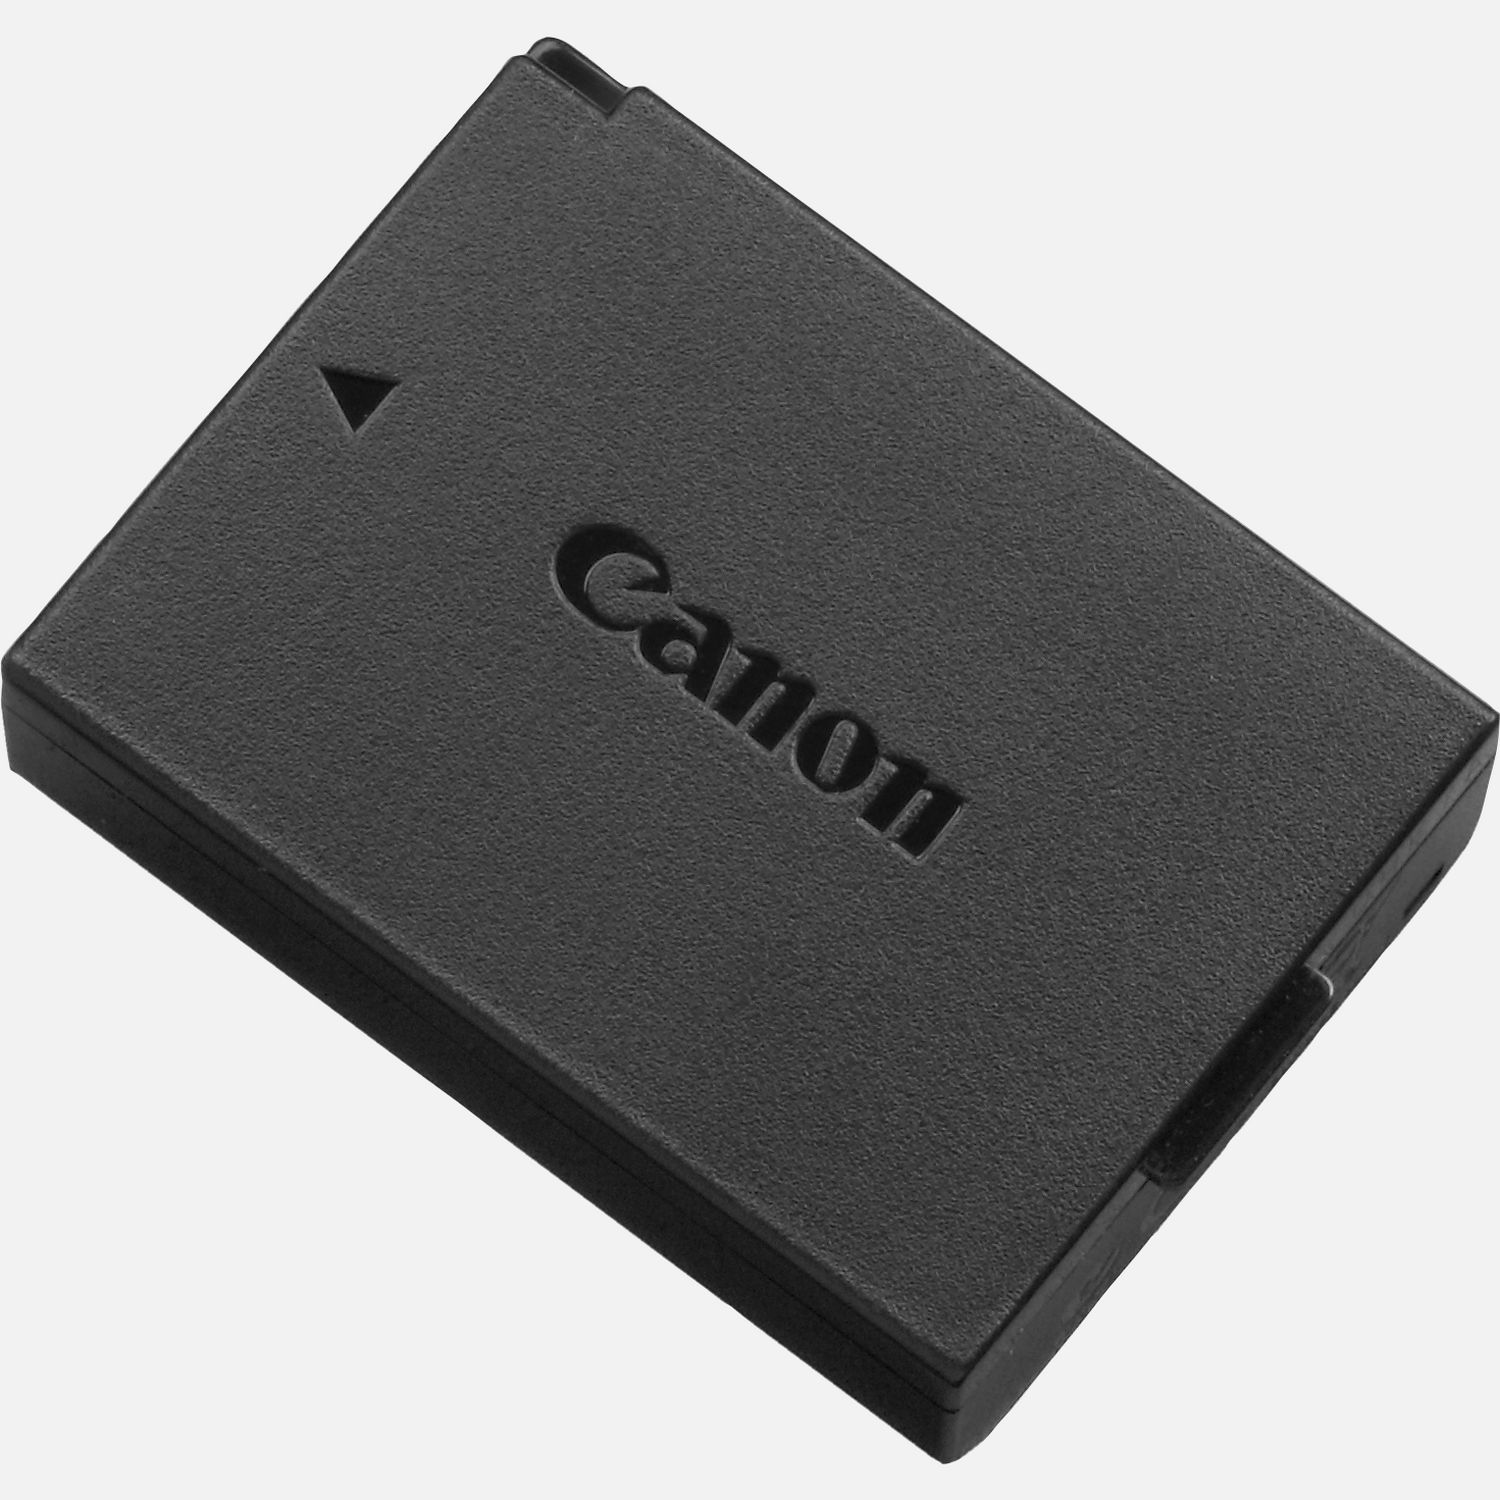 Canon 2× LP-E10 Battery For Canon EOS 1300D 1200D 4000D 2000D REBEL LCD Dual Charger 